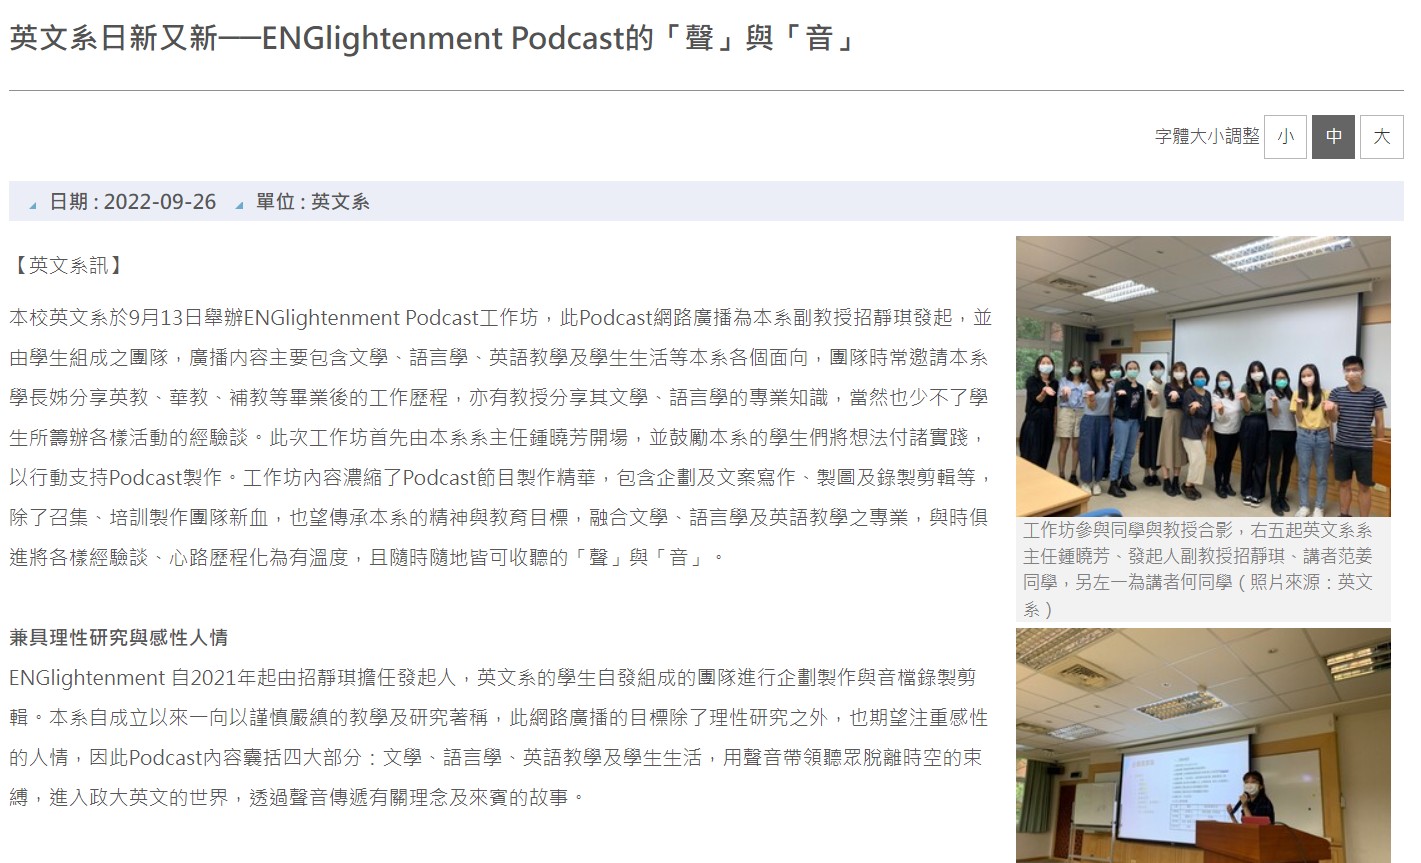 Be Enlightened by ENGlightenment Podcast: The Voices of the Department of English